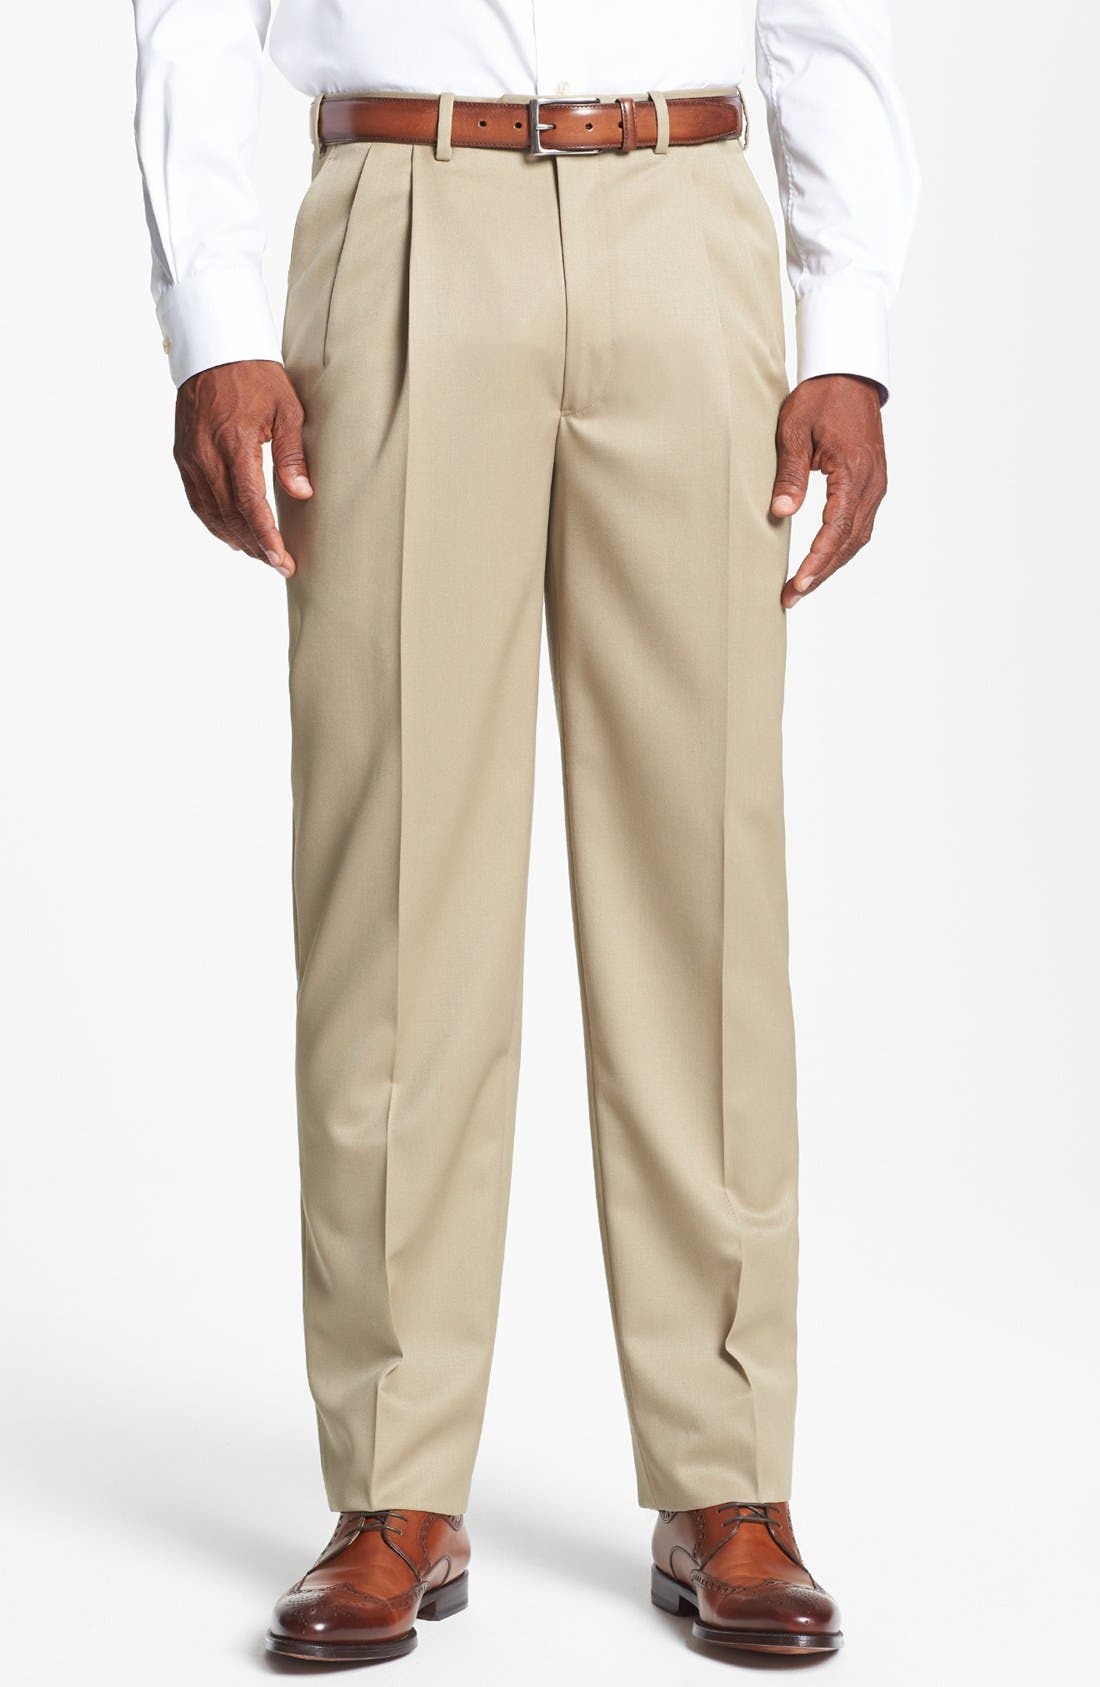 JB Britches Pleated Super 100s Worsted Wool Trousers, $155 | Nordstrom ...